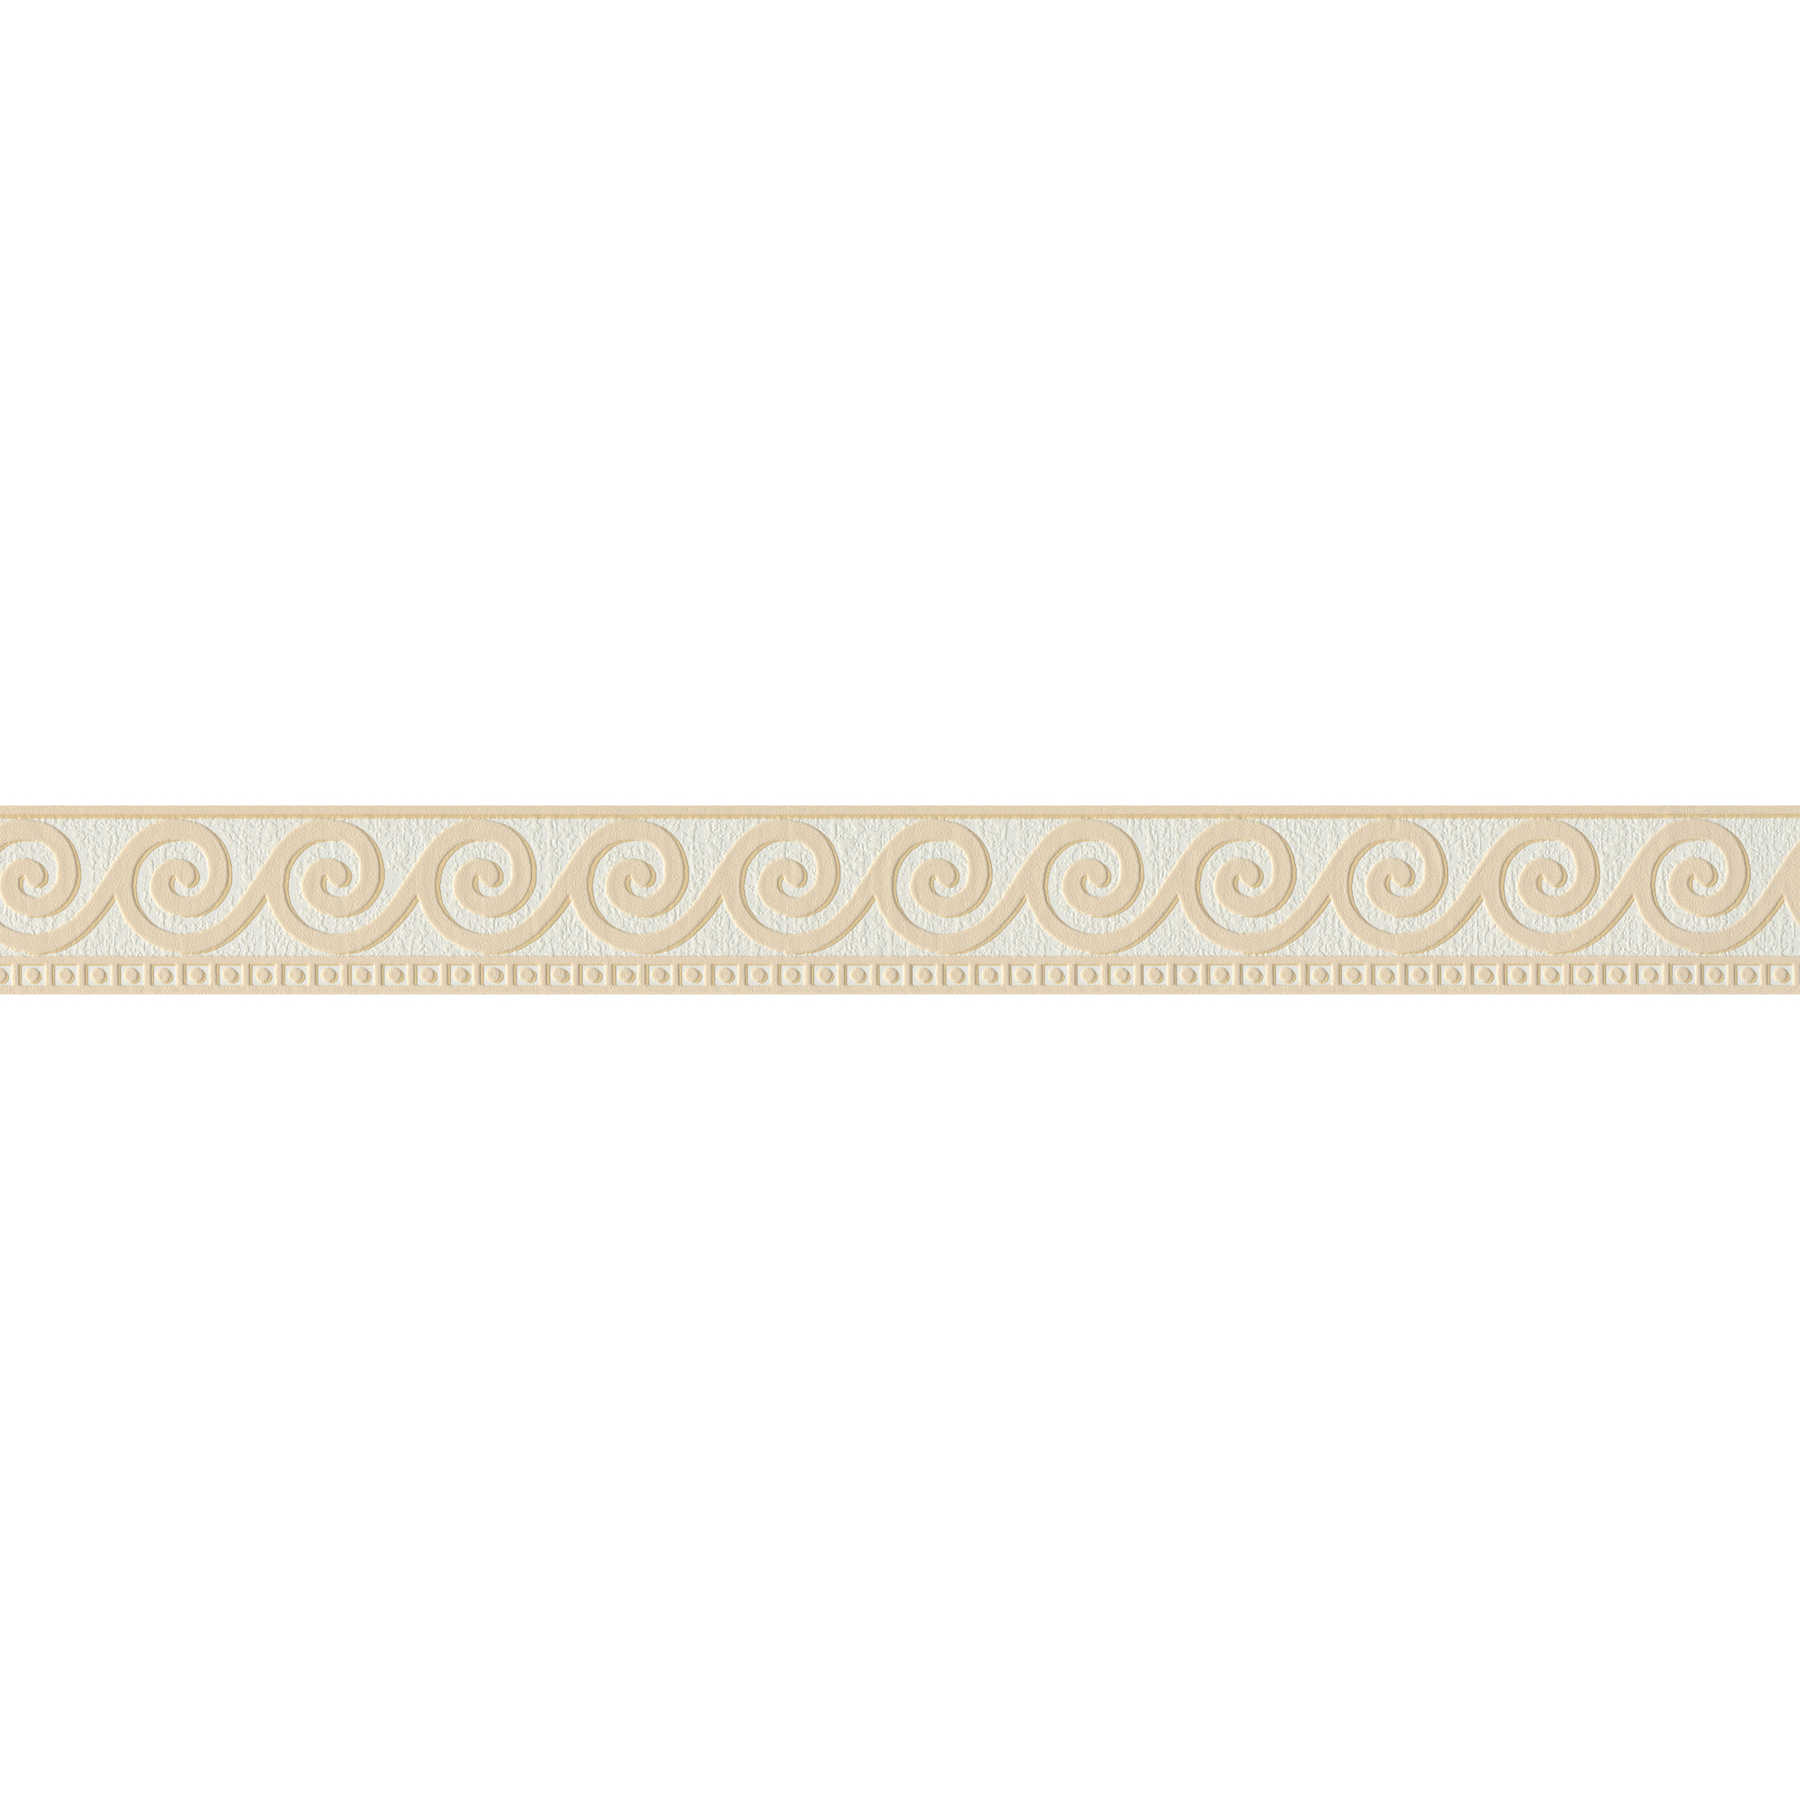 Ornament border with meander with texture pattern - Beige, White
